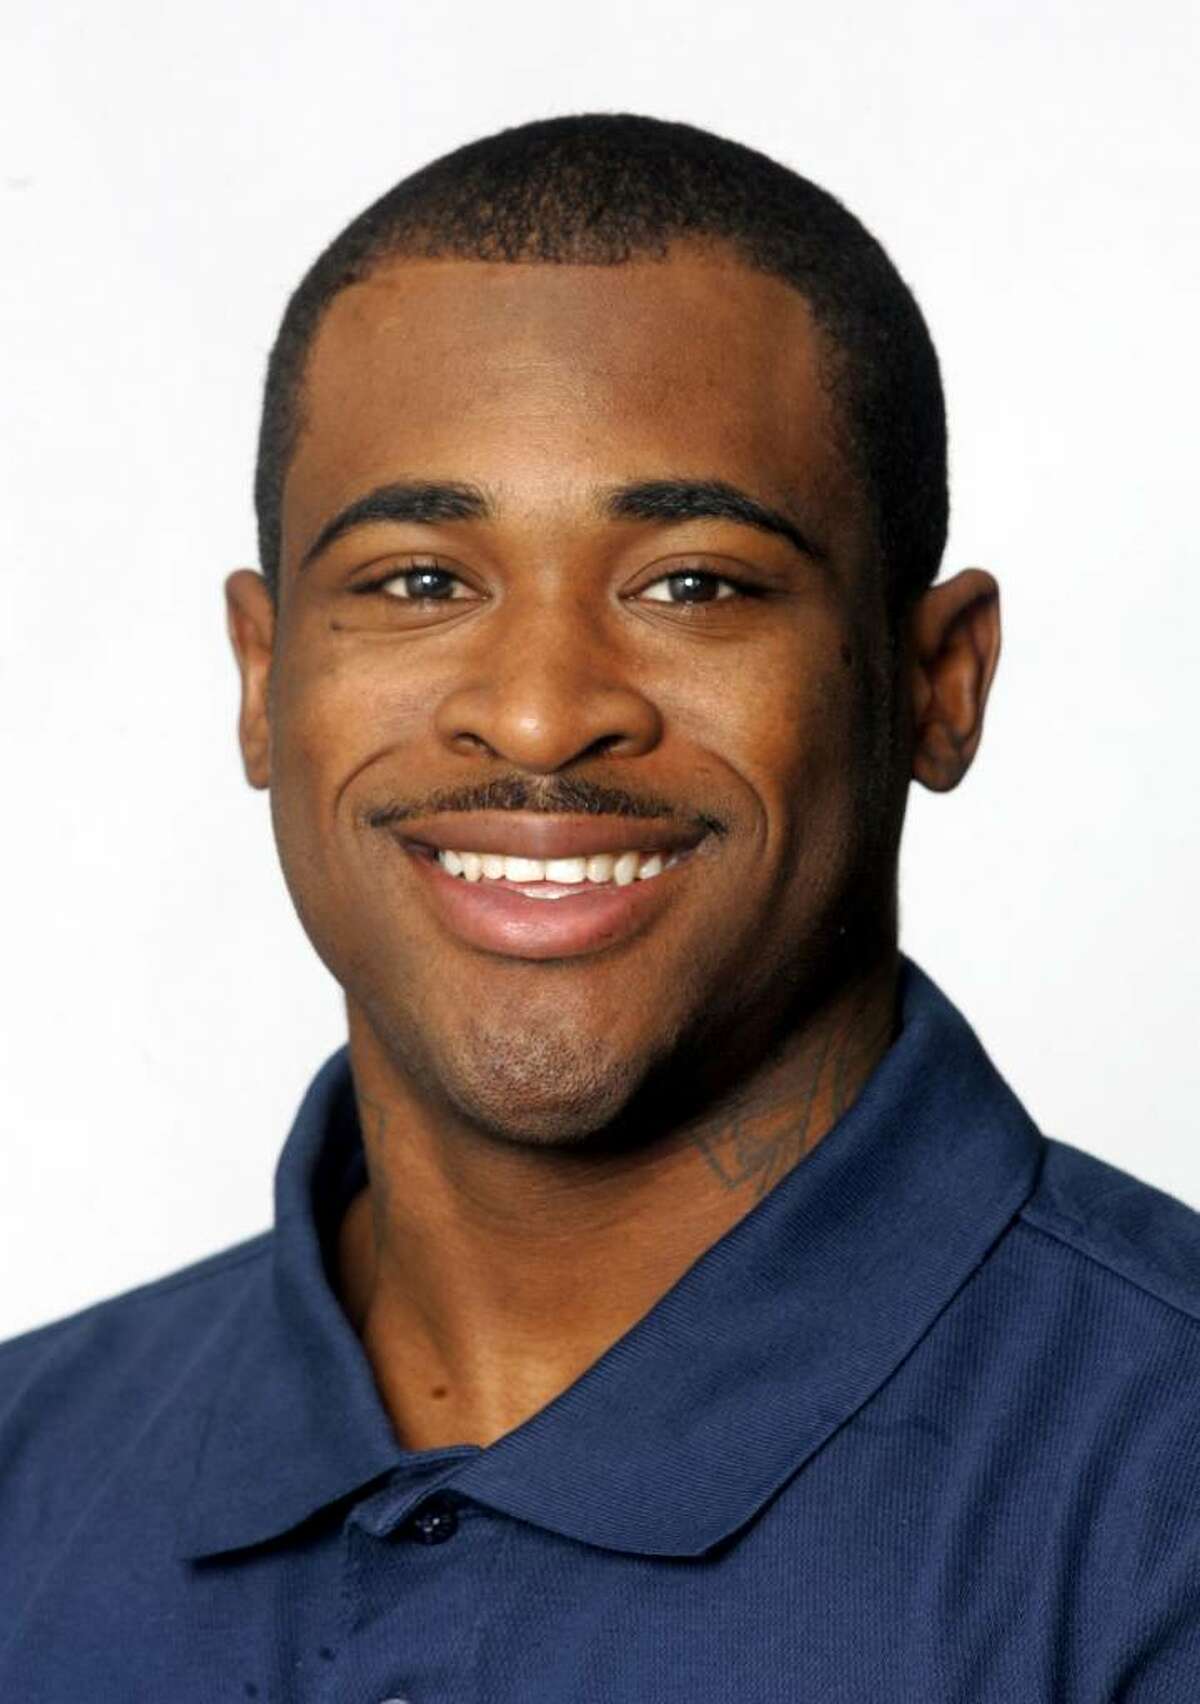 University of Connecticut football cornerback Jasper Howard died in the early hours of Oct. 18, 2009 after being stabbed on campus outside a student dance.